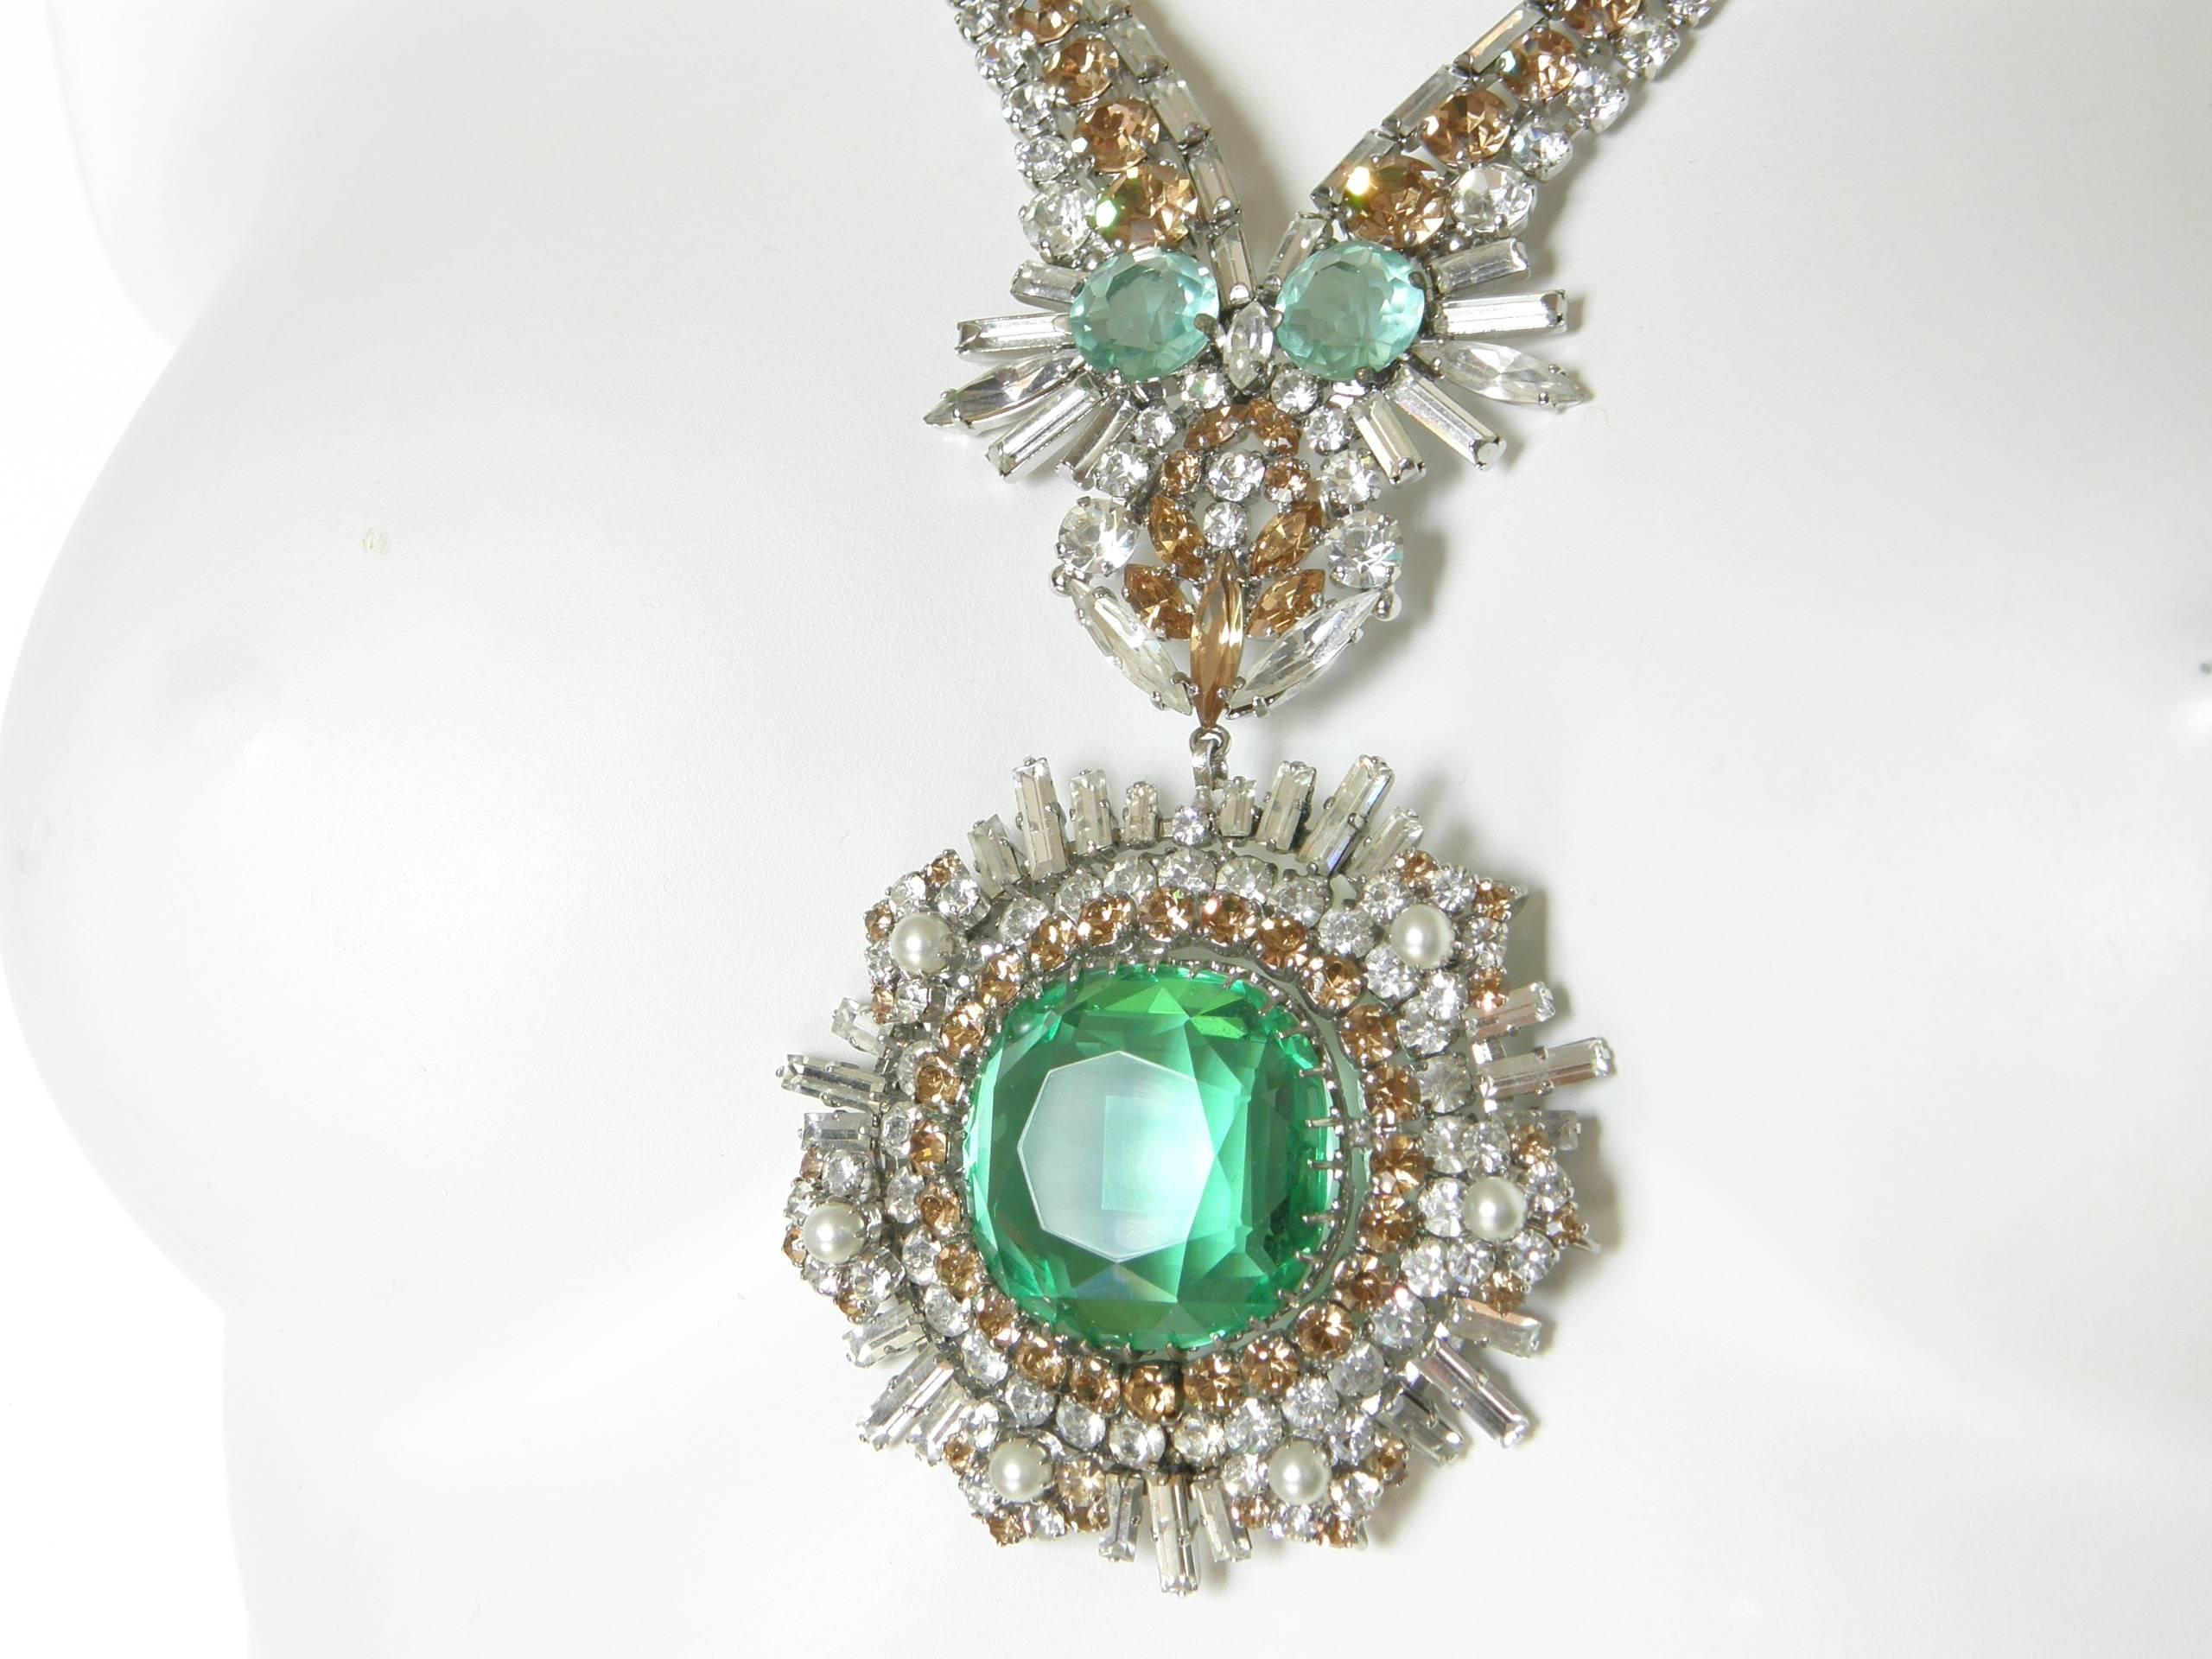 Women's West German Rhinestone Necklace with Faux Emeralds Diamonds and Citrines